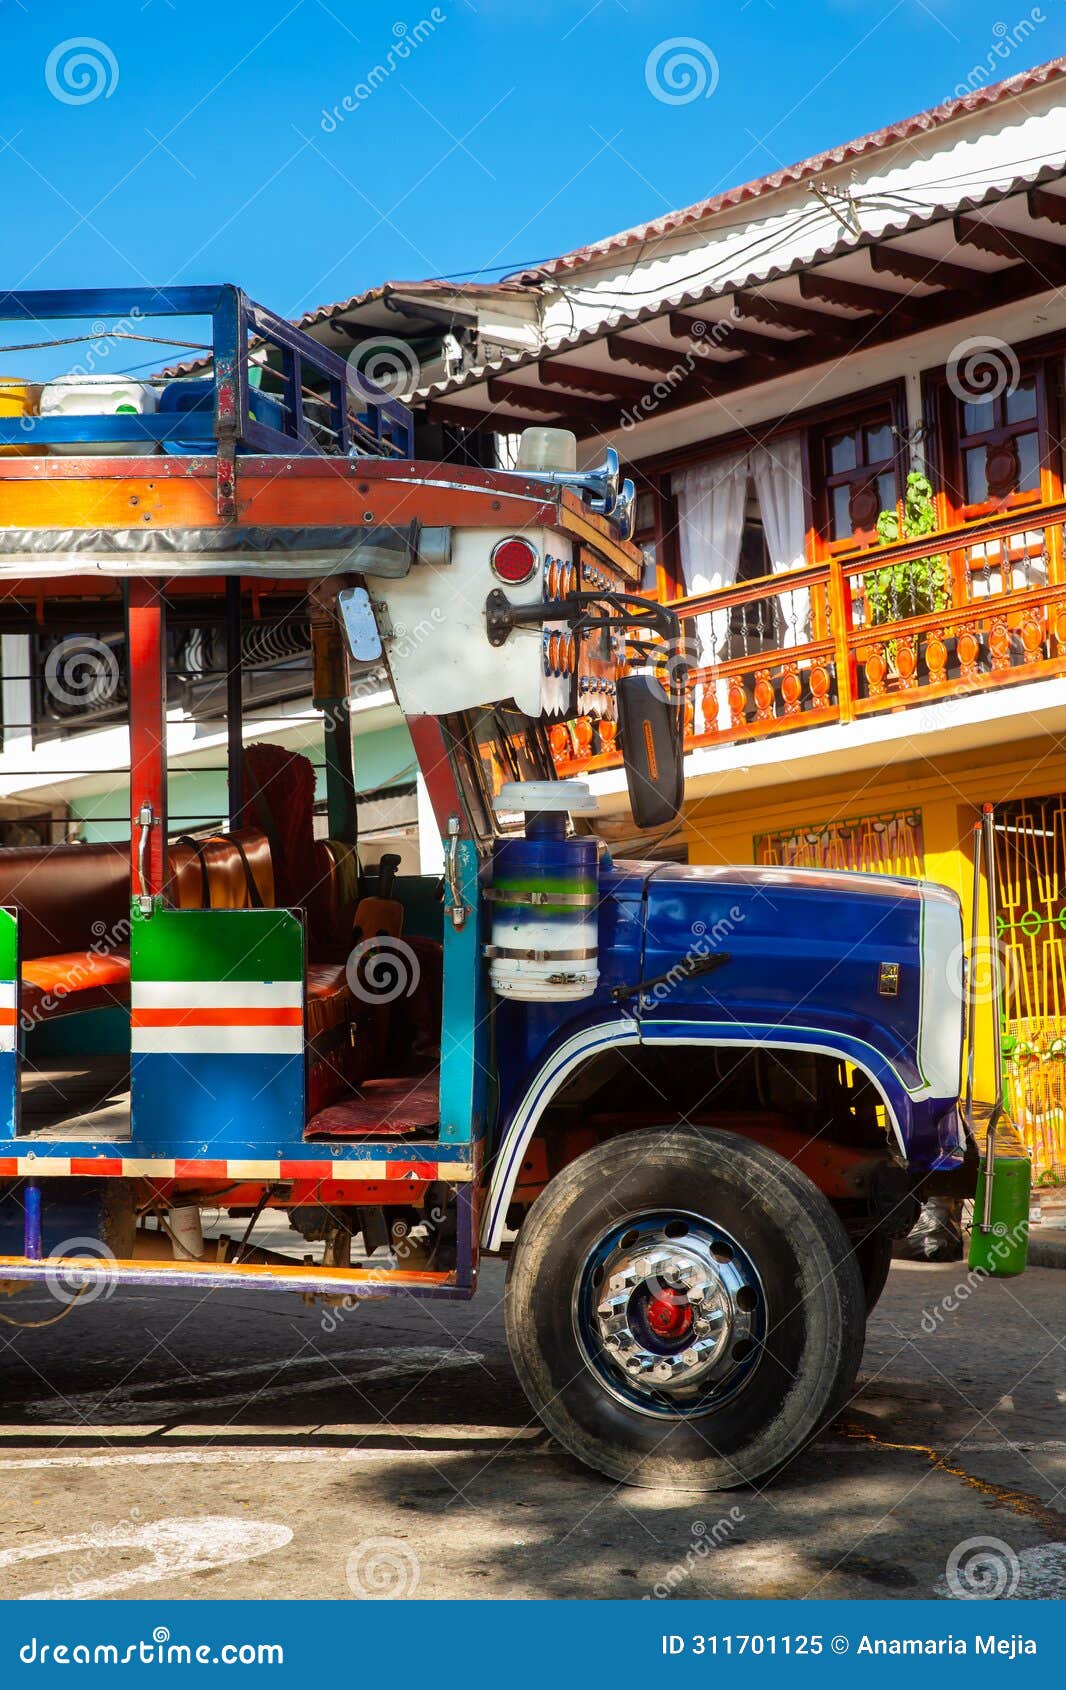 colorful traditional rural bus from colombia called chiva